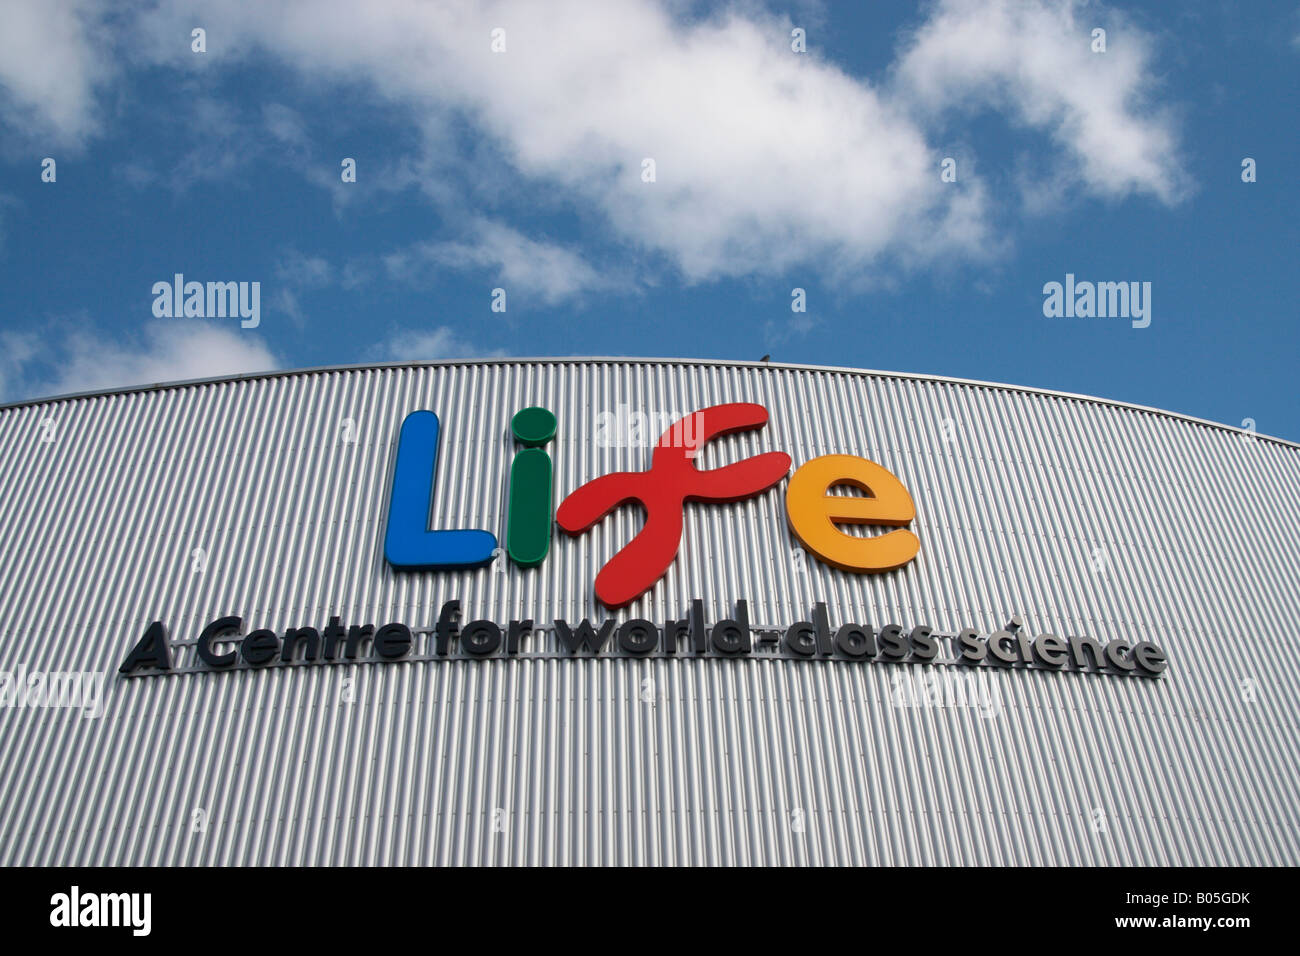 Life science centre in Newcastle upon tyne, England, europe Stock Photo